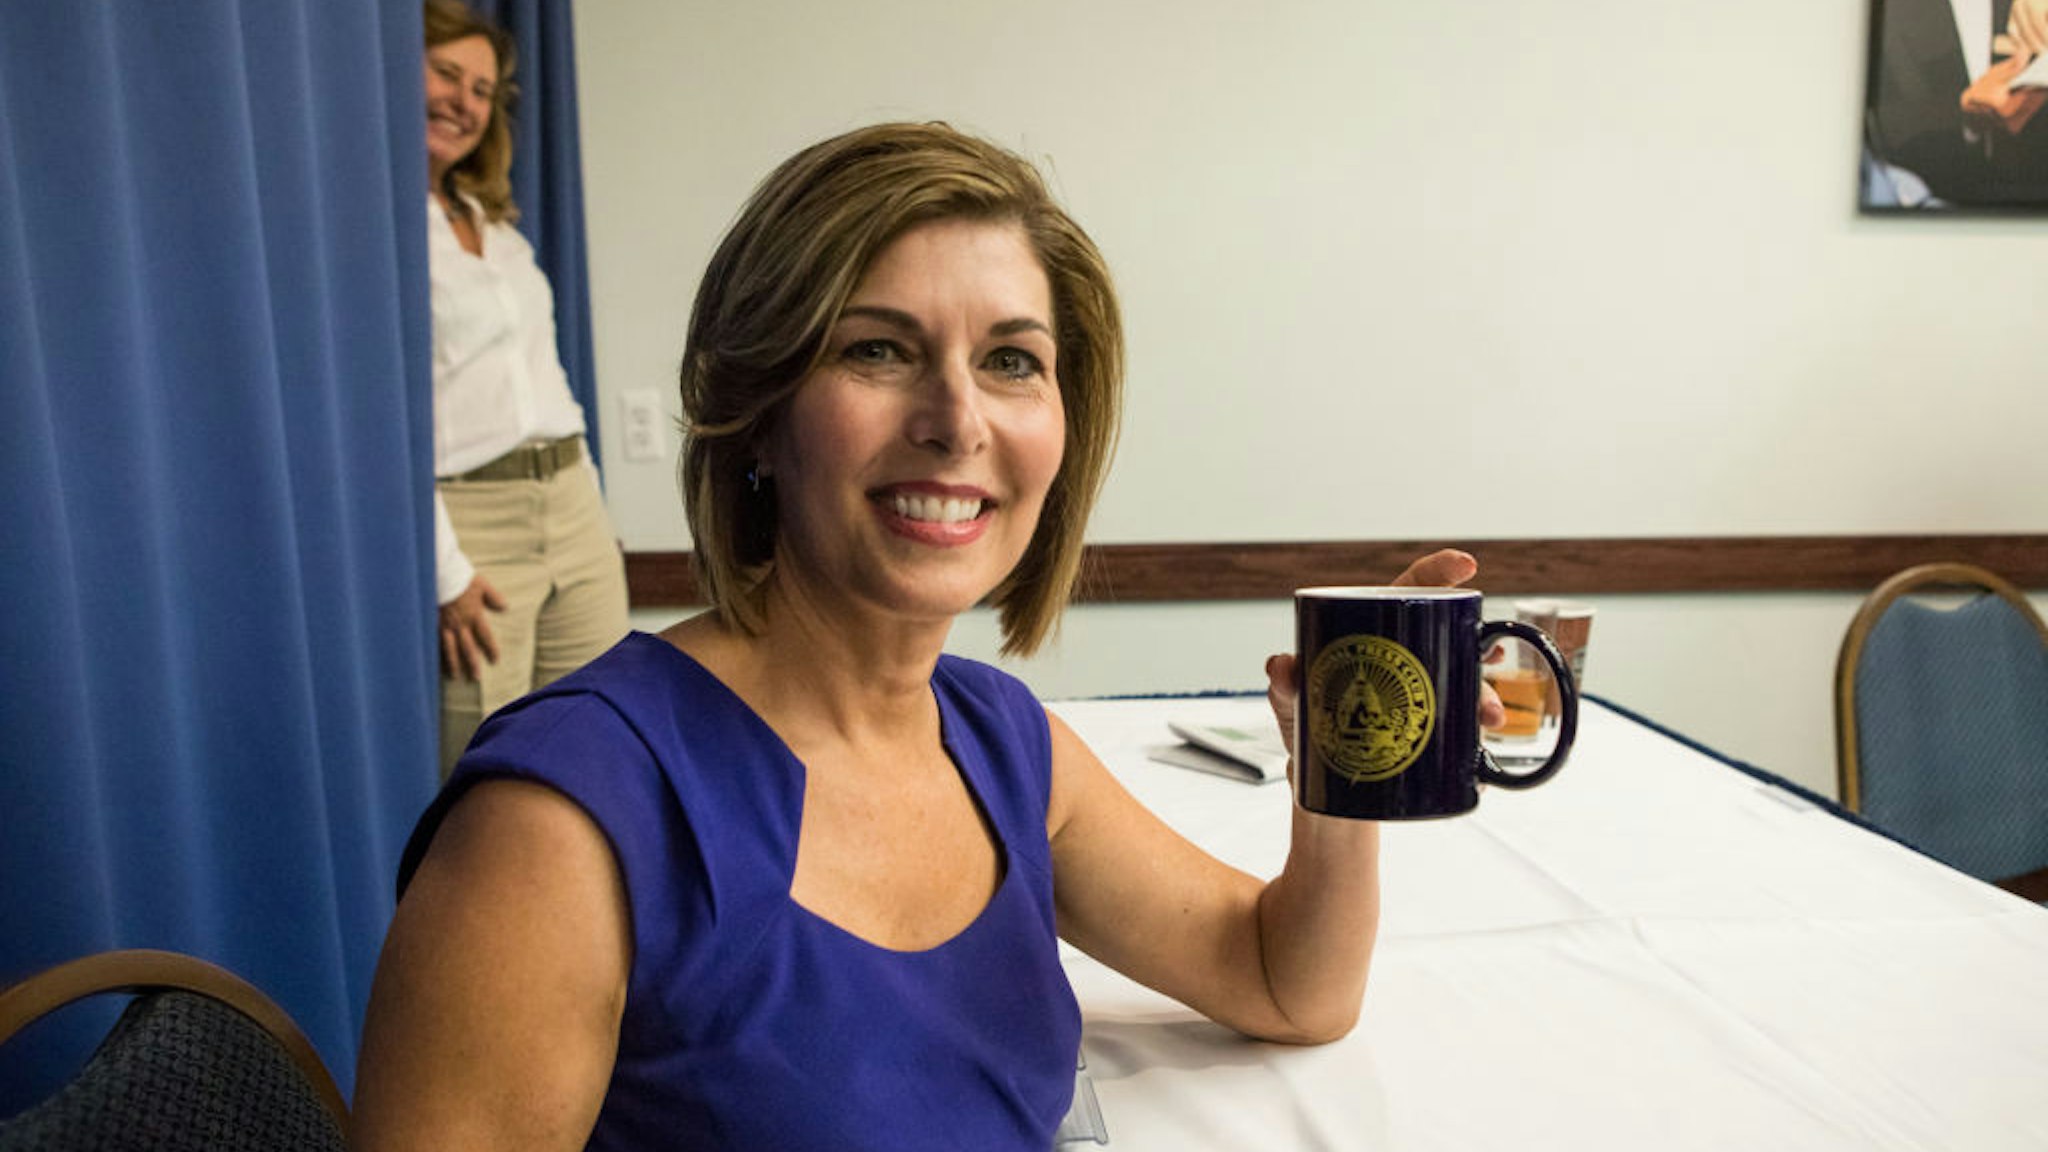 Former CBS News Correspondent Sharyl Attkisson, author of The Smear: How Shady Political Operatives and Fake News Control What You See, What You Think and How You Vote, holds up her National Press Club coffee mug, at the Club's Headliners Book Event in Washington, D.C., on Thursday, August 31, 2017.